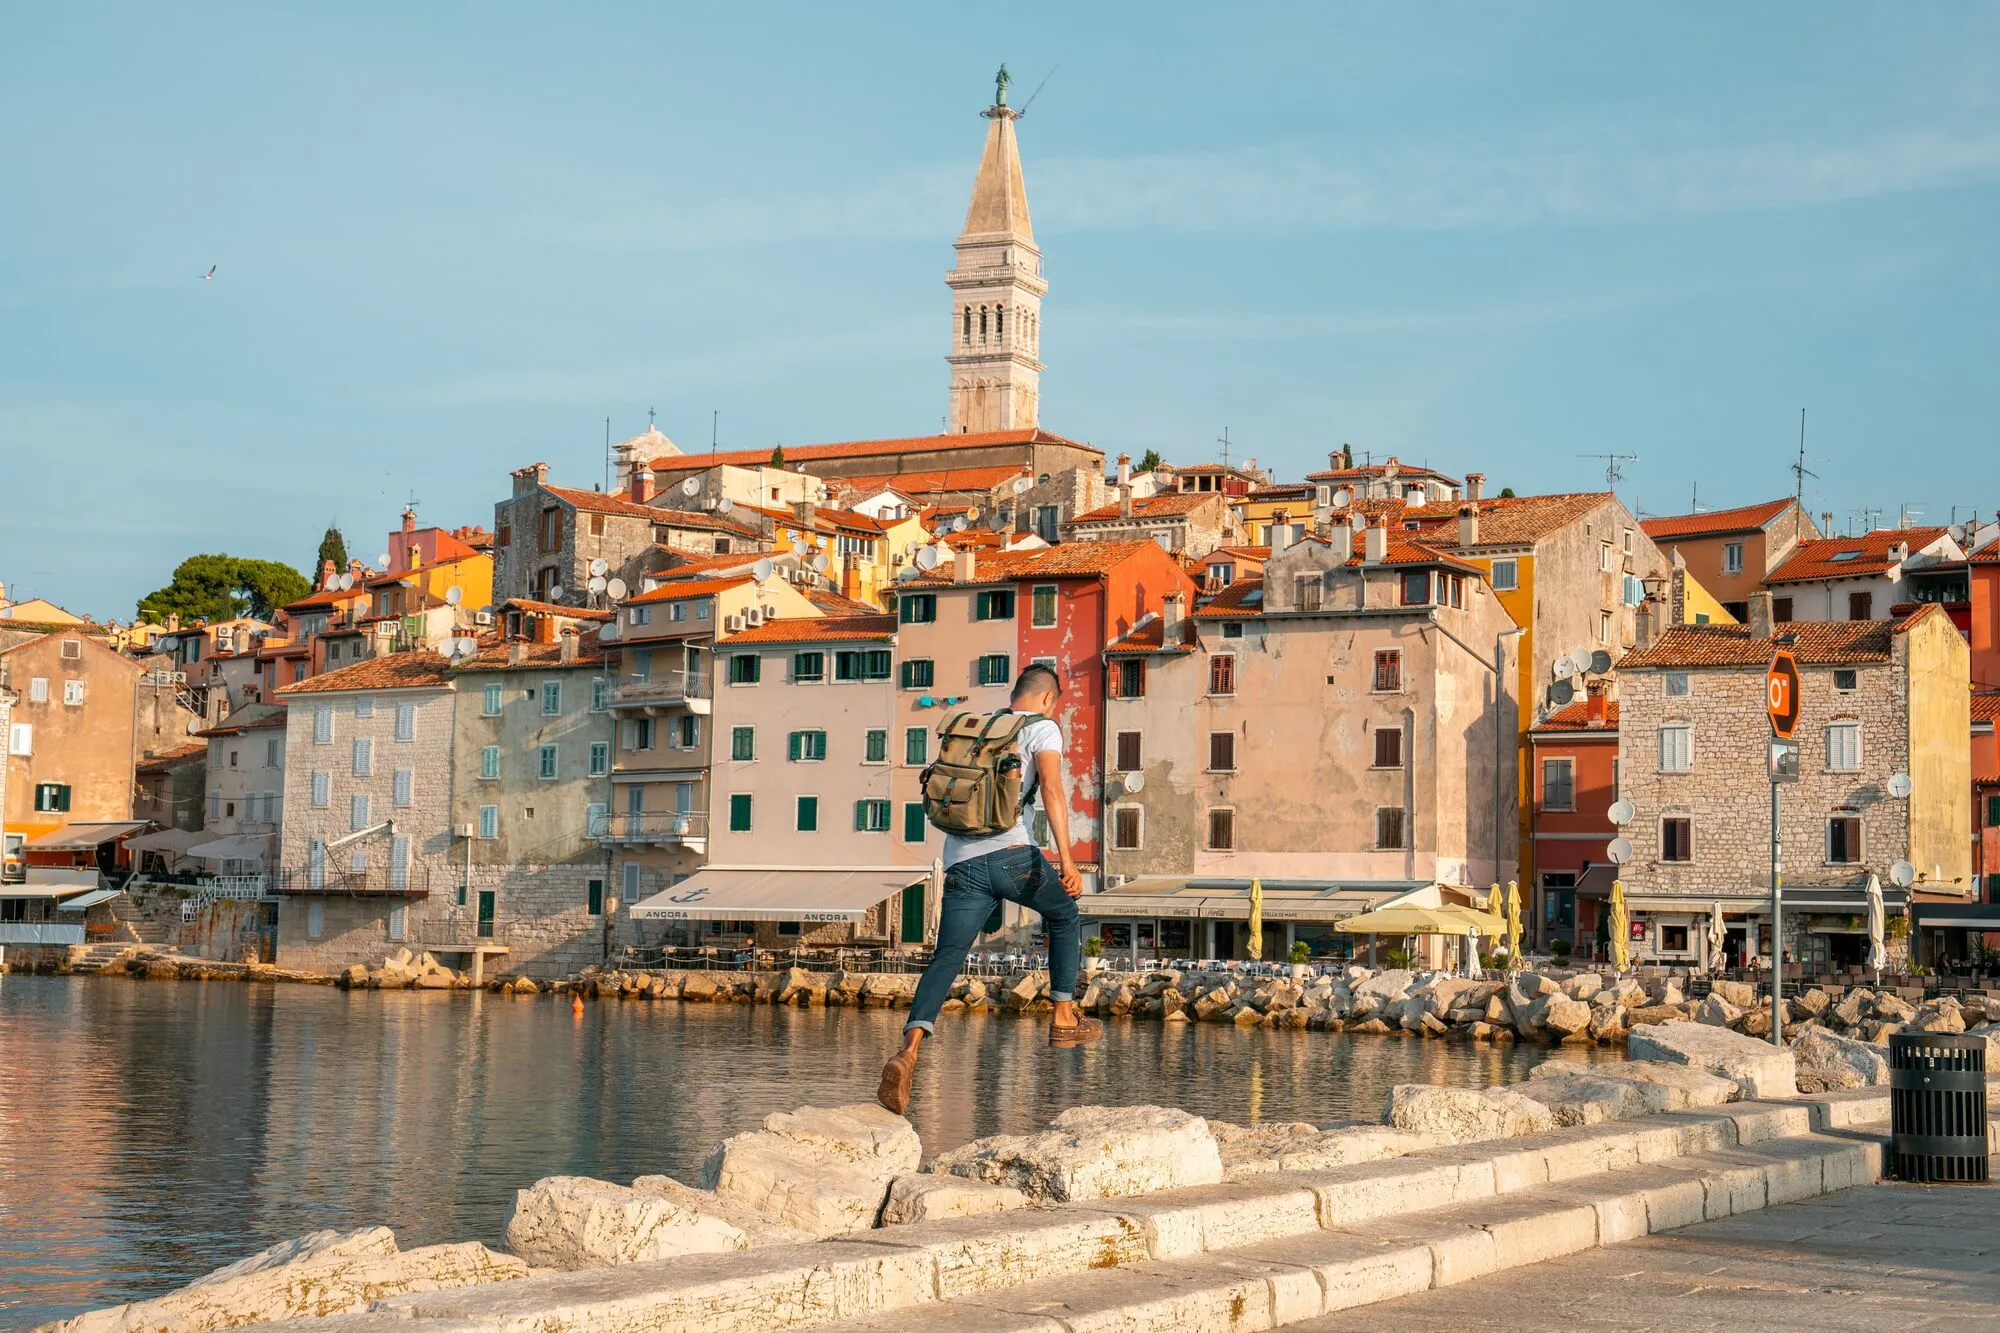 10 Awesome Things to Do in Rovinj for First-Timers - A Complete Guide to Backpacking Rovinj